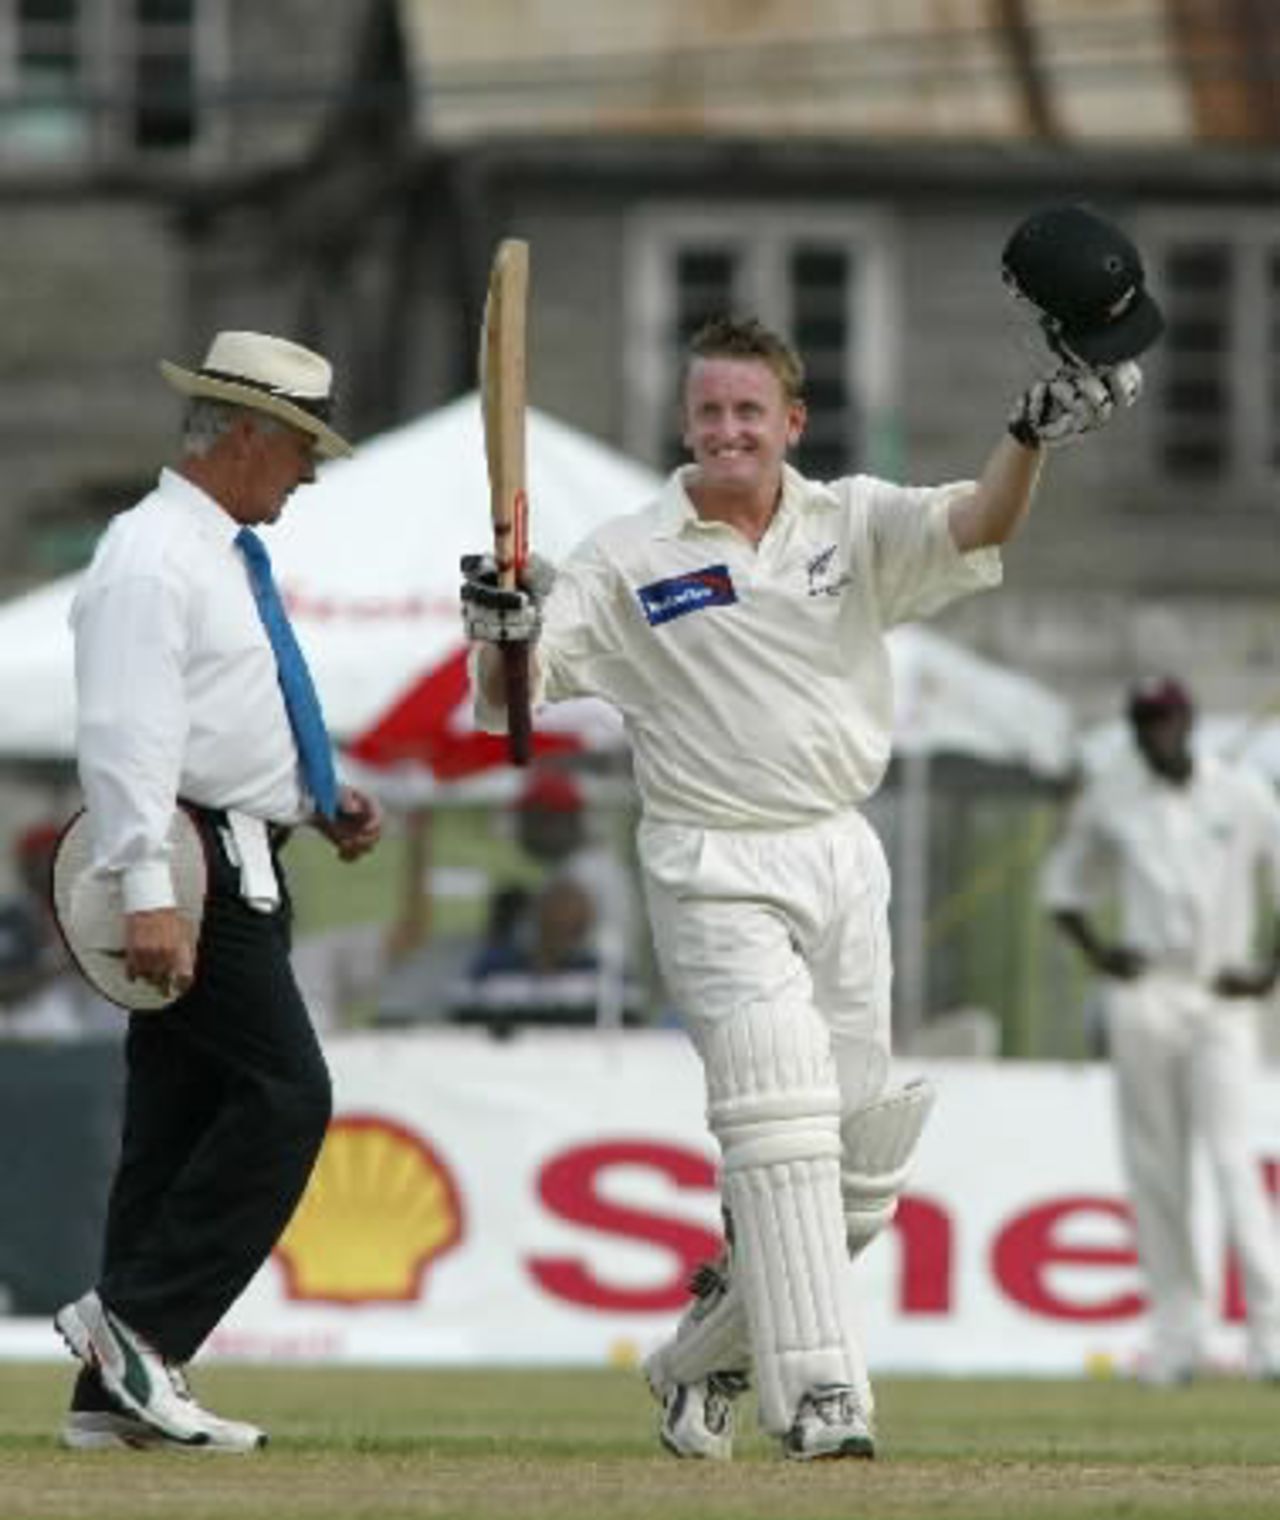 New Zealand batsman Scott Styris raises his bat and helmet to celebrate reaching his century on debut. Styris went on to score 107 in his first innings. 2nd Test: West Indies v New Zealand at Queen's Park, St George's, Grenada, 28 June-2 July 2002 (29 June 2002).